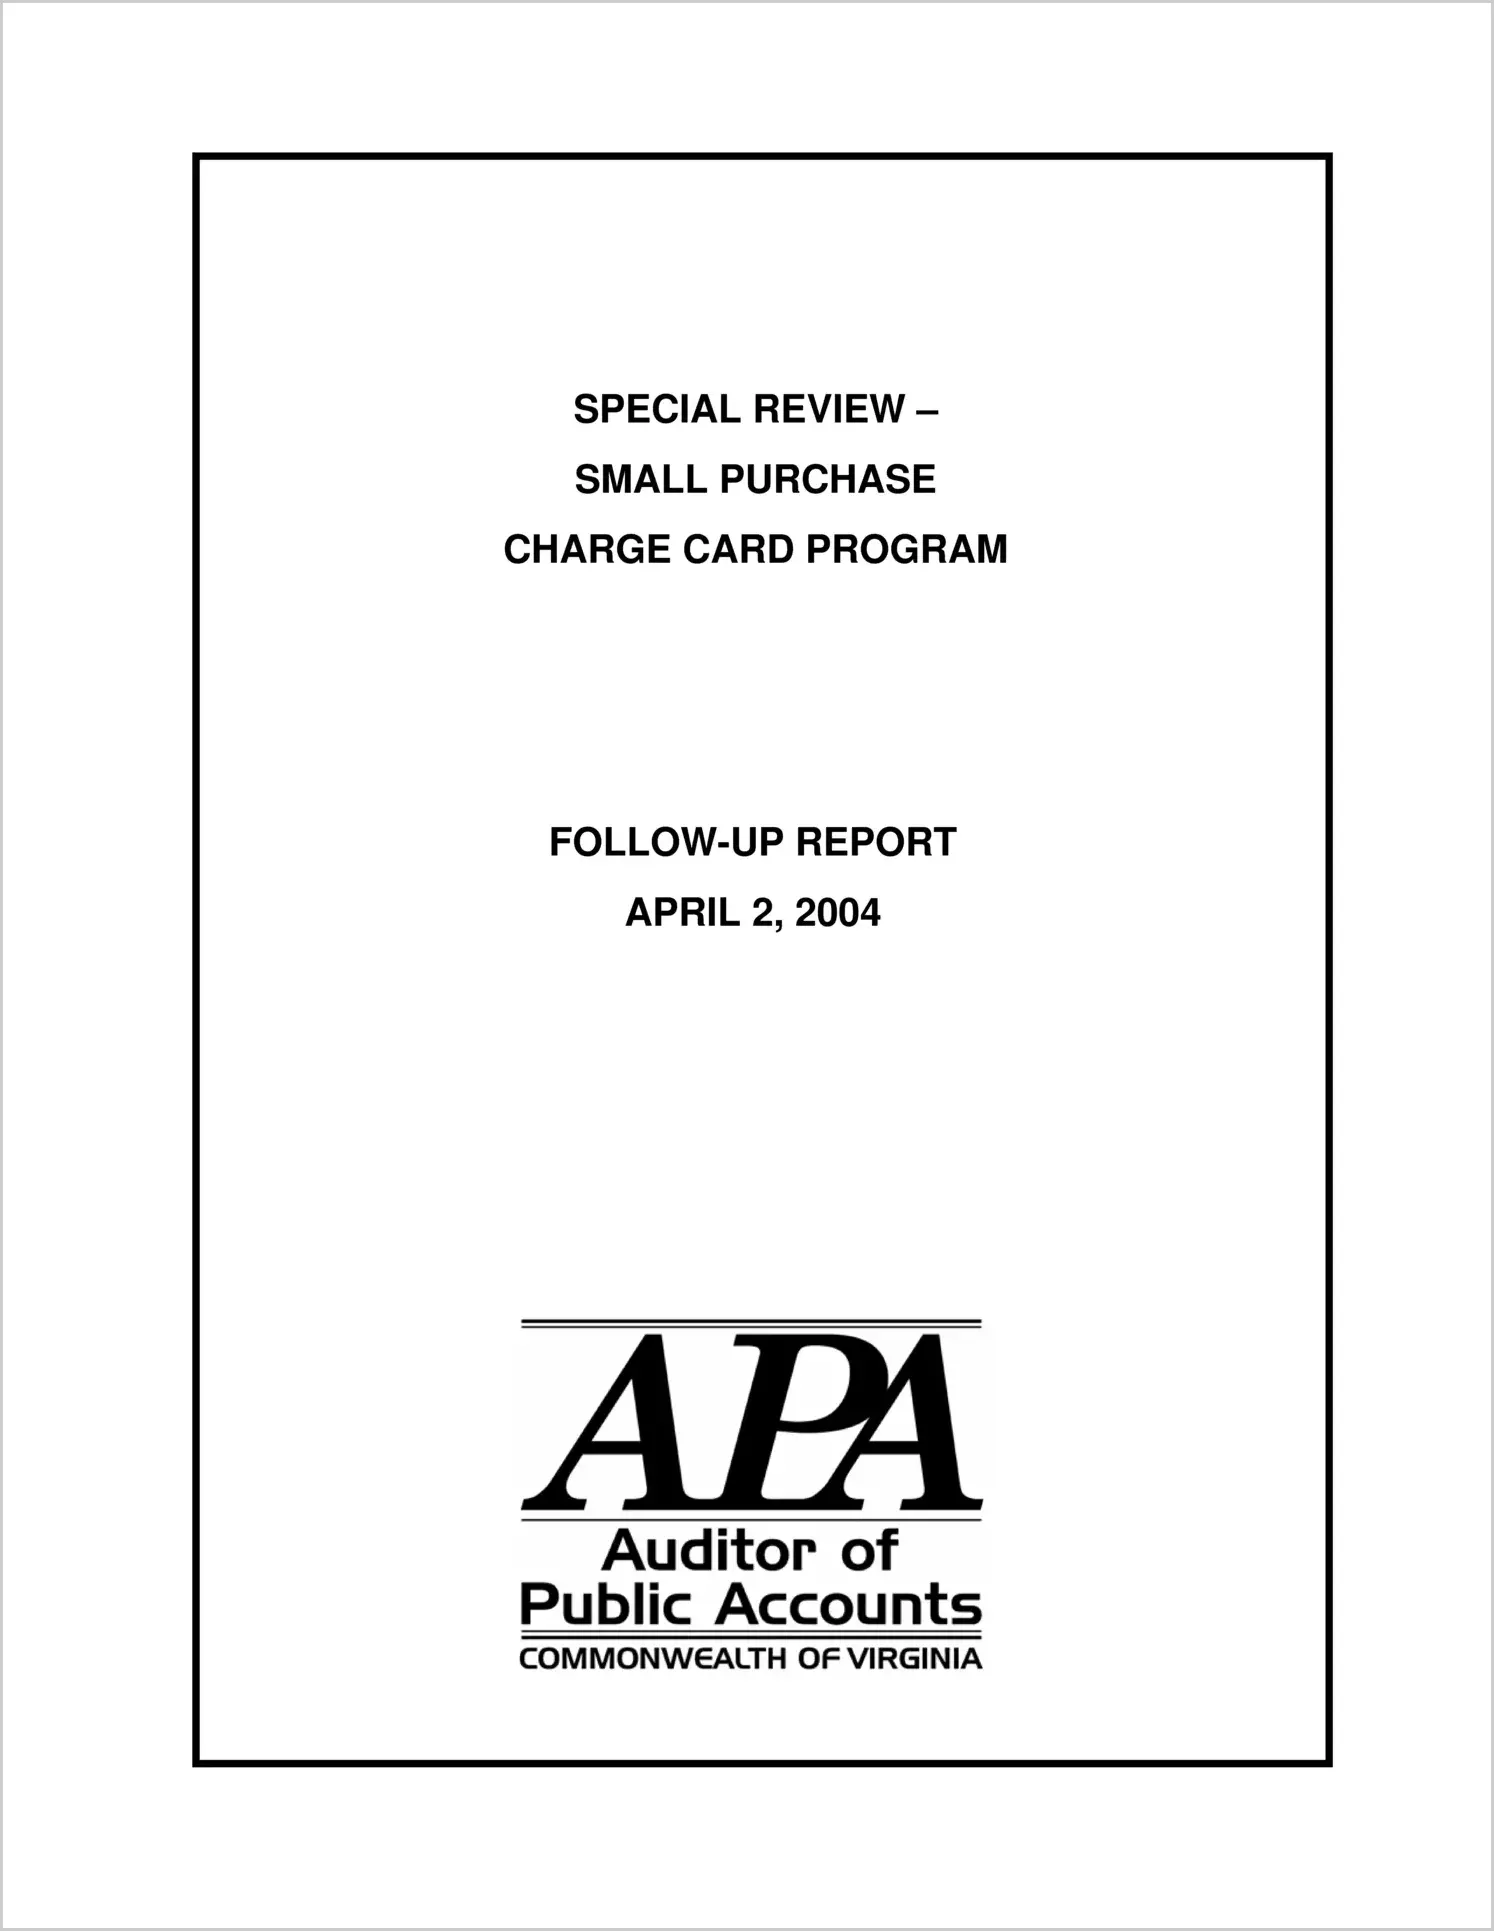 Special ReportSpecial Review Small Purchase Charge Card Program Follow-Up Report(Report Date: April 2, 2004)